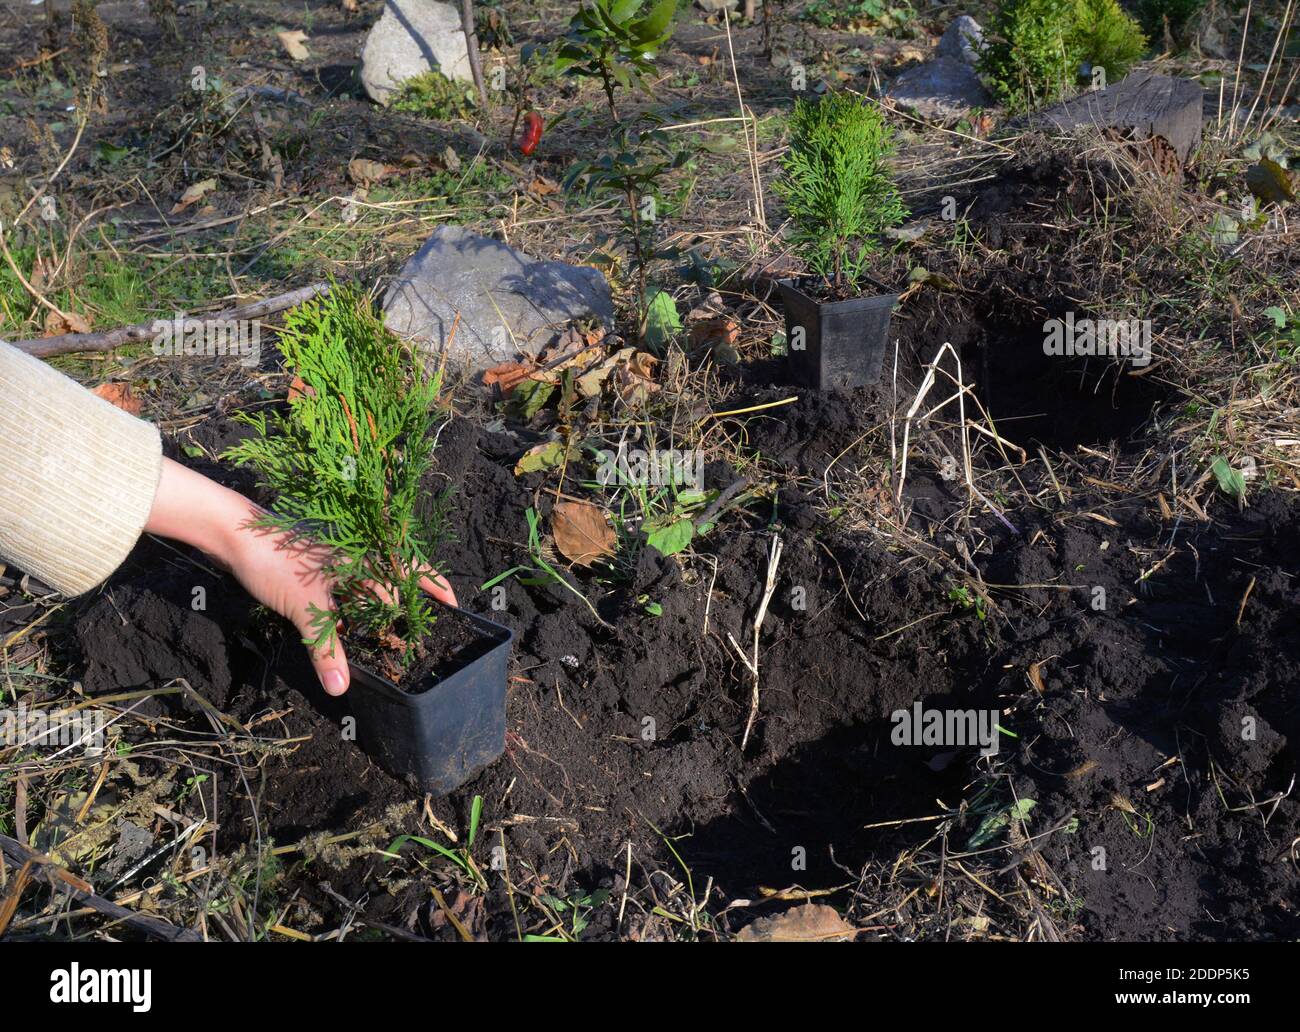 A gardener is planting Thuja occidentalis Smaragd or Emerald Green, American Arborvitae saplings from pots into soil in the flowerbed, backyard of the Stock Photo